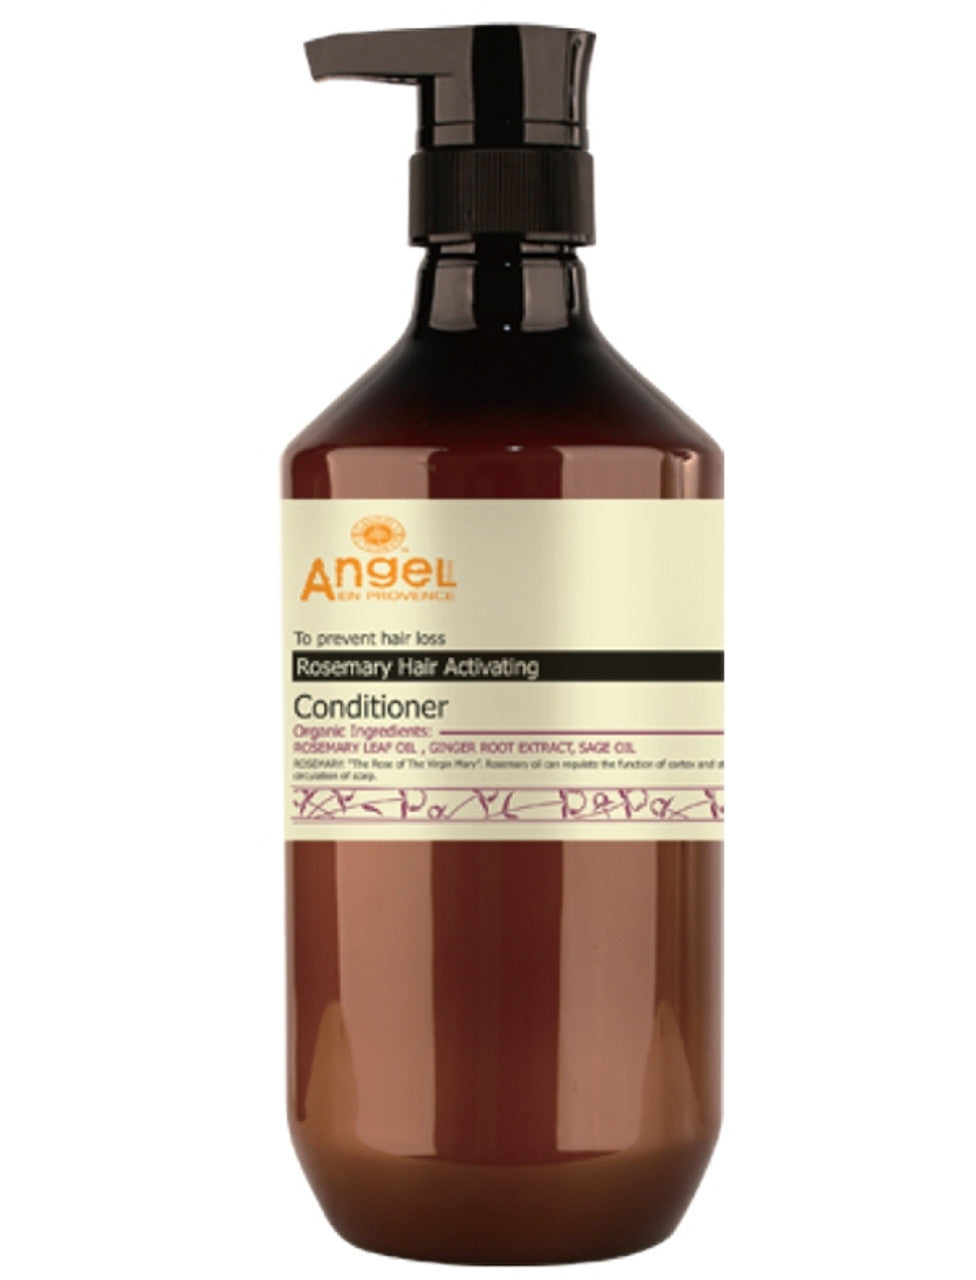 Angel Rosemary Hair Activating Conditioner 800ml